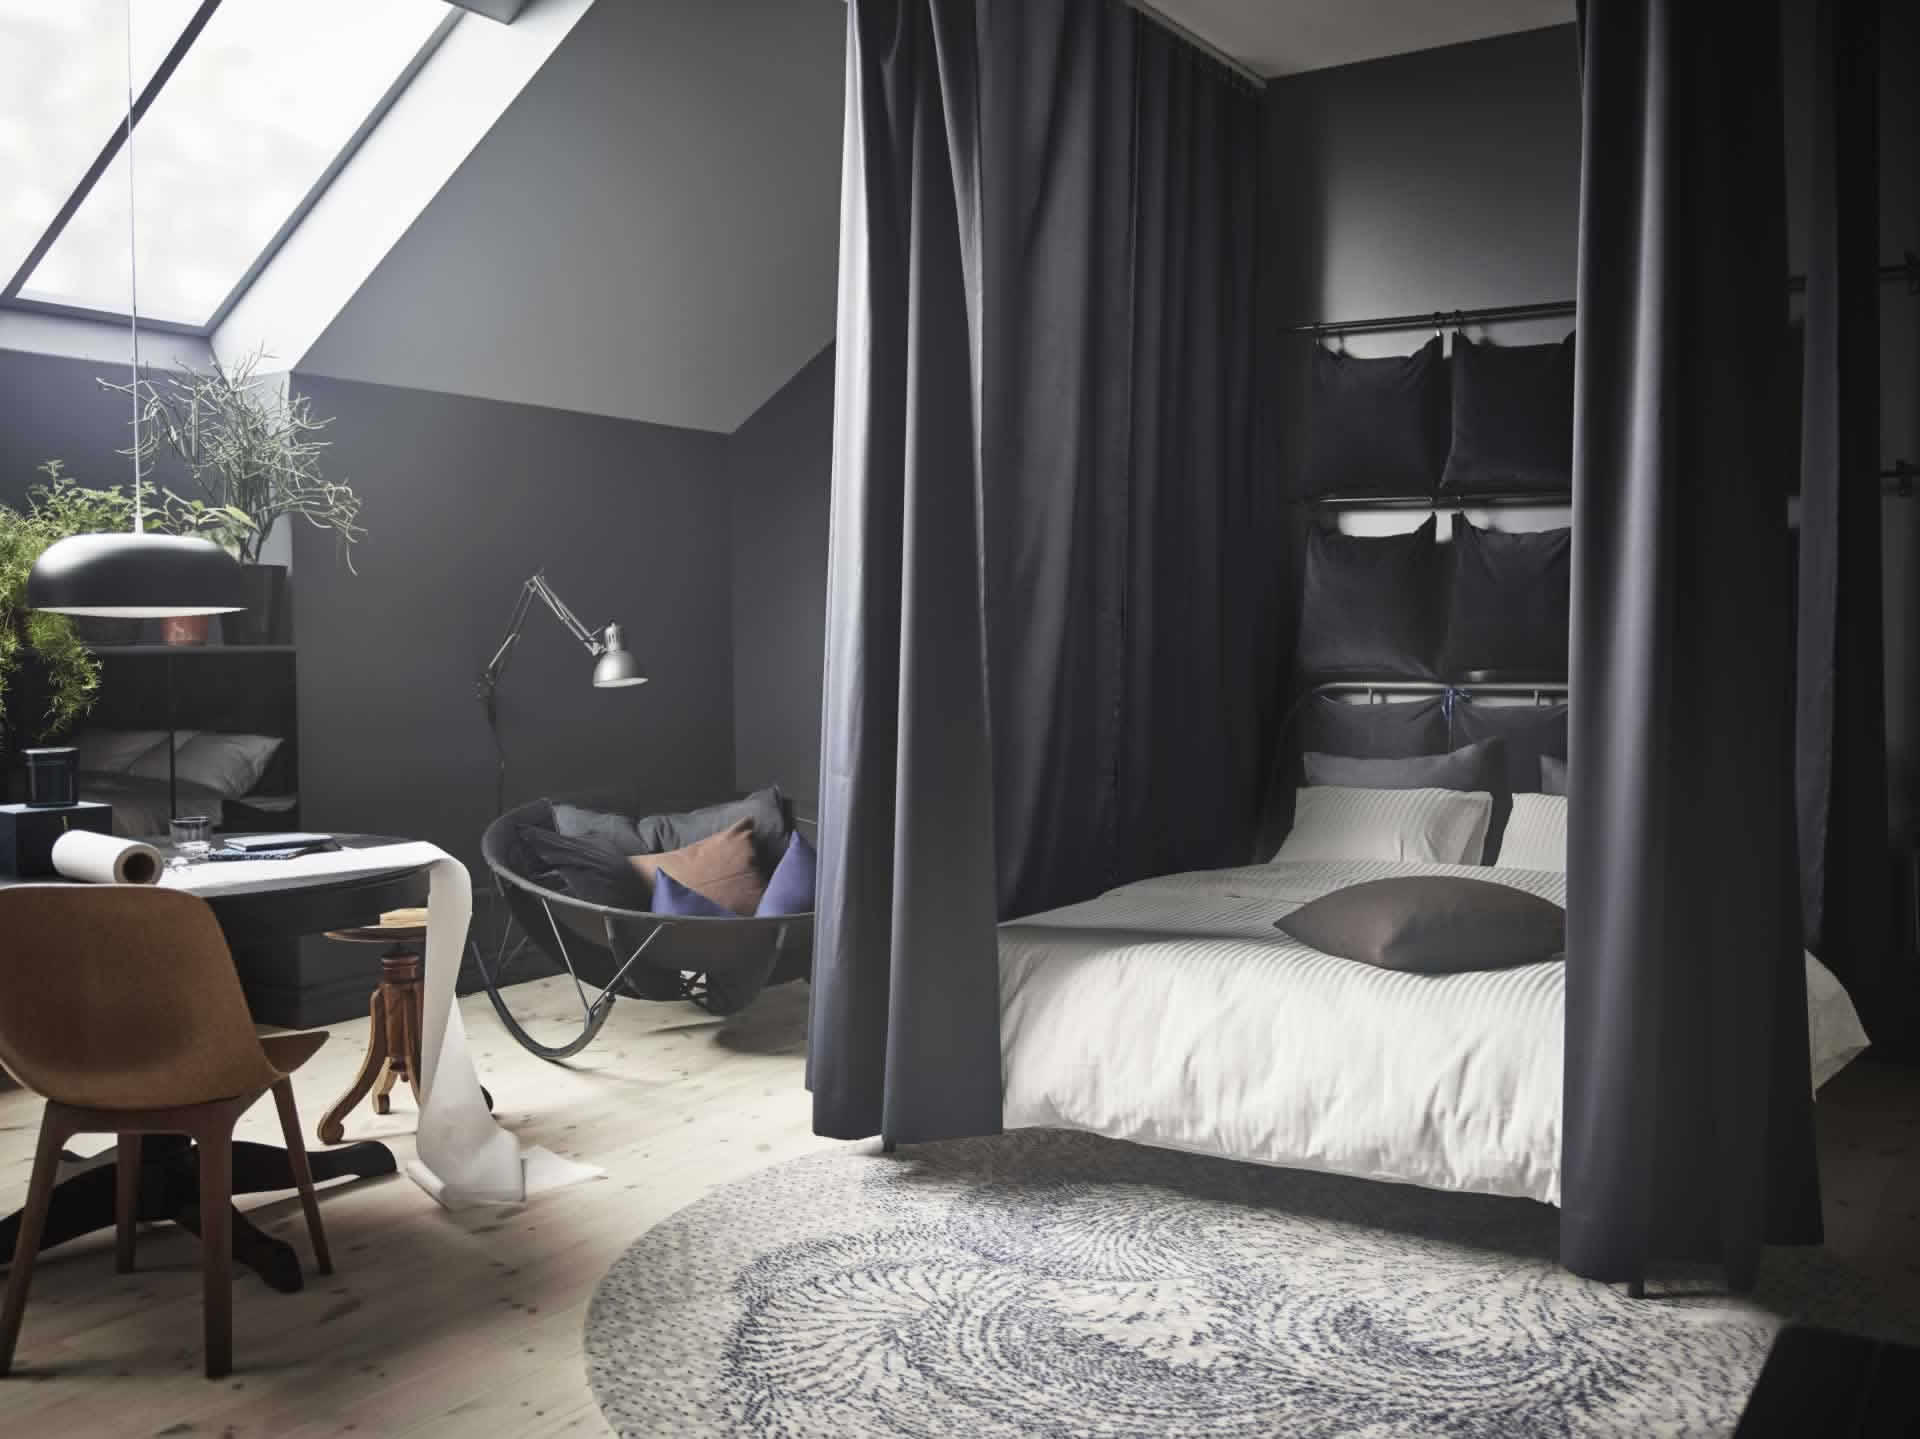 IKEA Ideas - A stay-all-day bedroom sanctuary.